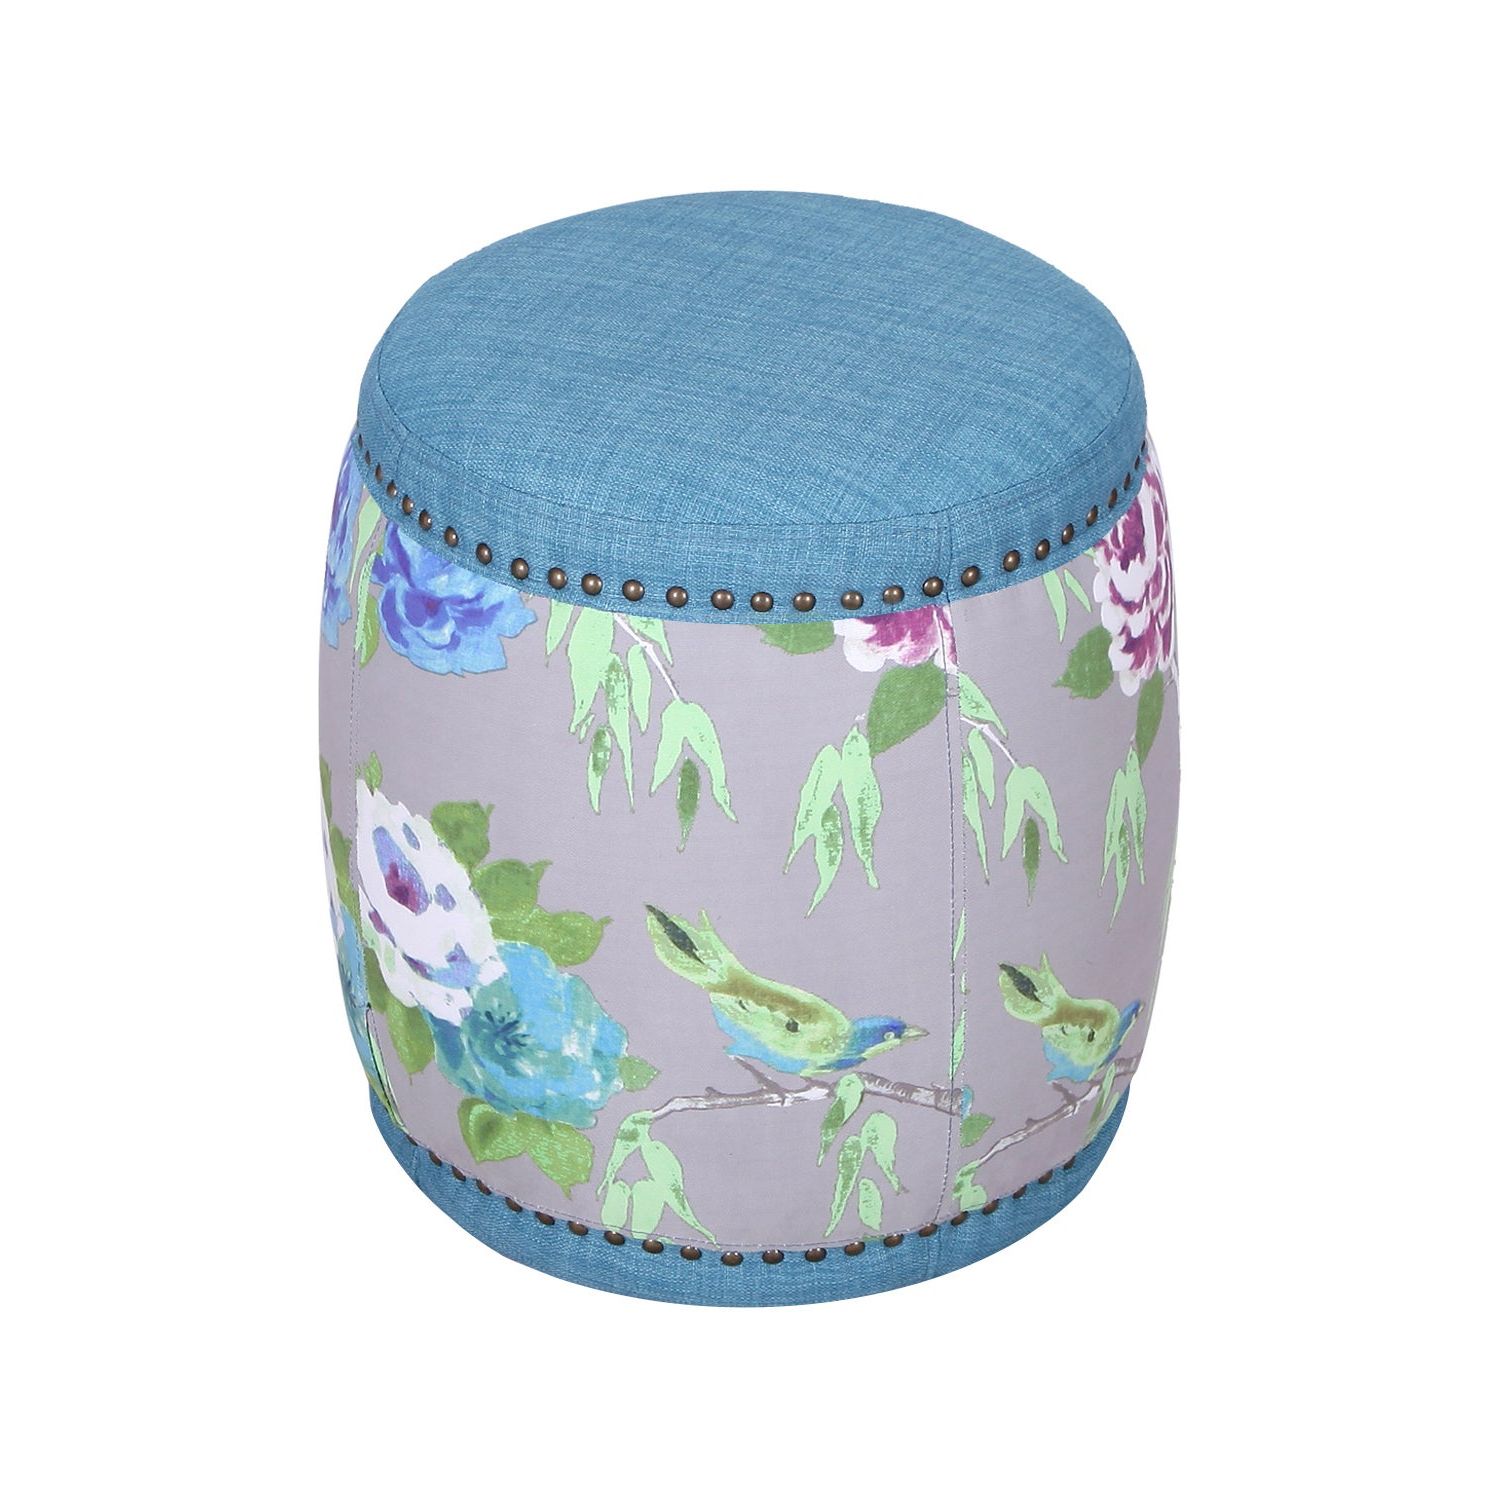 Most Current Adeco Accent Postmodernism Drum Shape Black Metal Coffee Tables Intended For Details About Flower Pattern Adeco Fabric Drum Ottoman/footstool Blue Small (View 11 of 20)